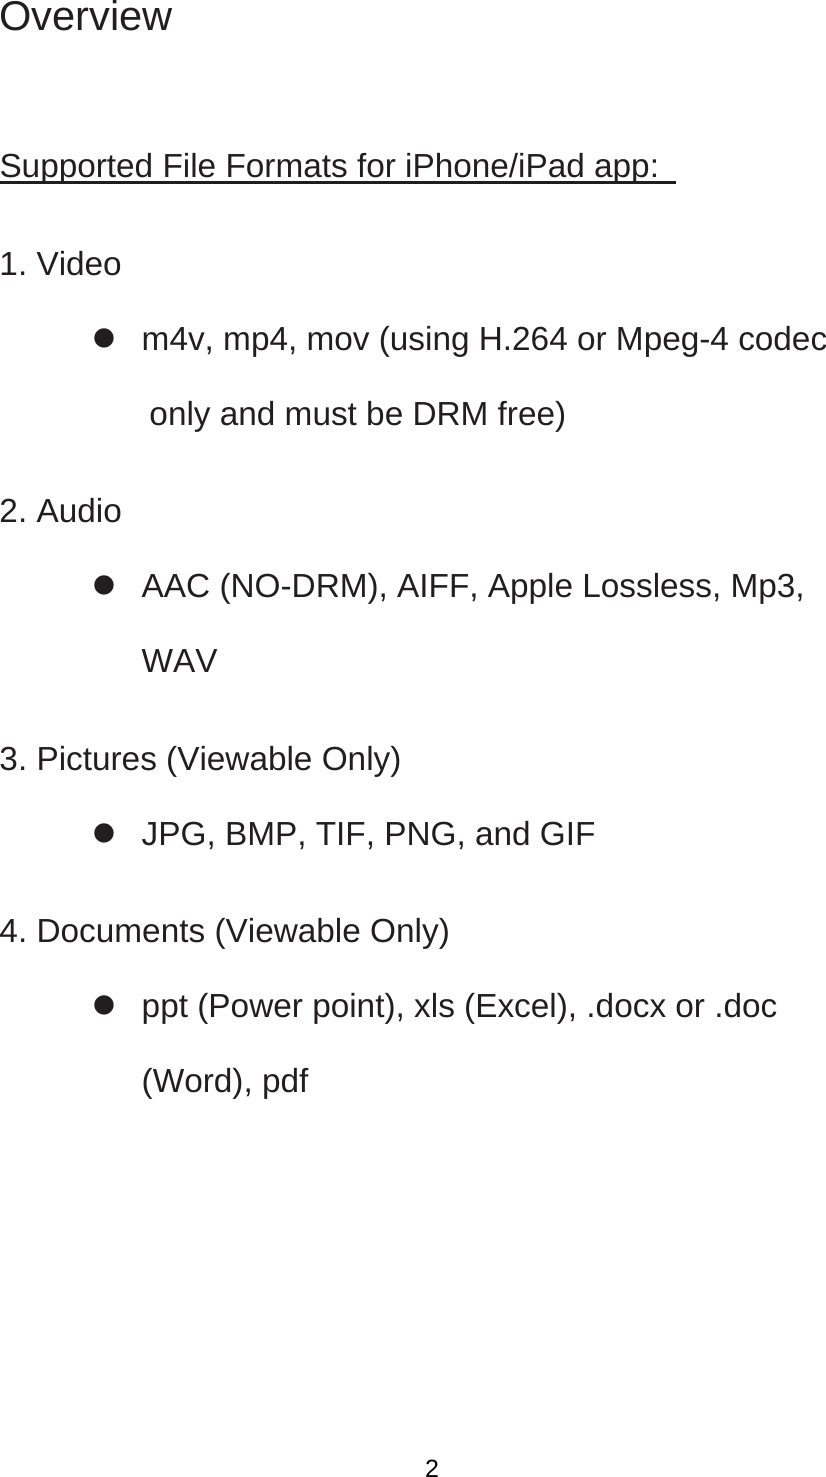 Overview  Supported File Formats for iPhone/iPad app:   1. Video     m4v, mp4, mov (using H.264 or Mpeg-4 codec   only and must be DRM free)   2. Audio     AAC (NO-DRM), AIFF, Apple Lossless, Mp3, WAV  3. Pictures (Viewable Only)     JPG, BMP, TIF, PNG, and GIF   4. Documents (Viewable Only)     ppt (Power point), xls (Excel), .docx or .doc (Word), pdf  2